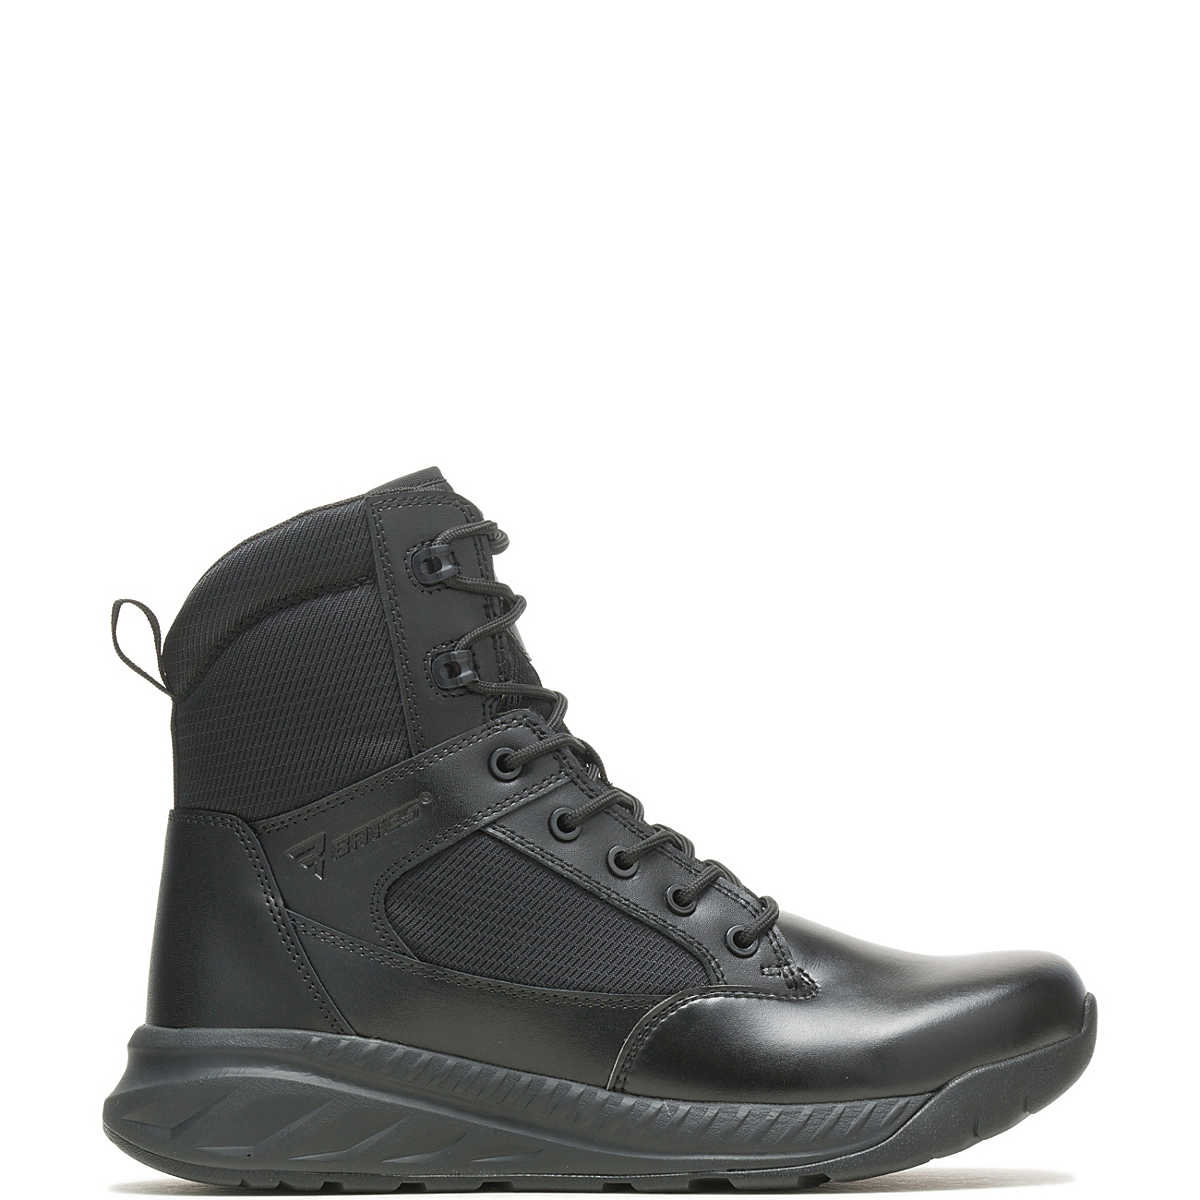 OpSpeed Tall Boot, Black, dynamic 1